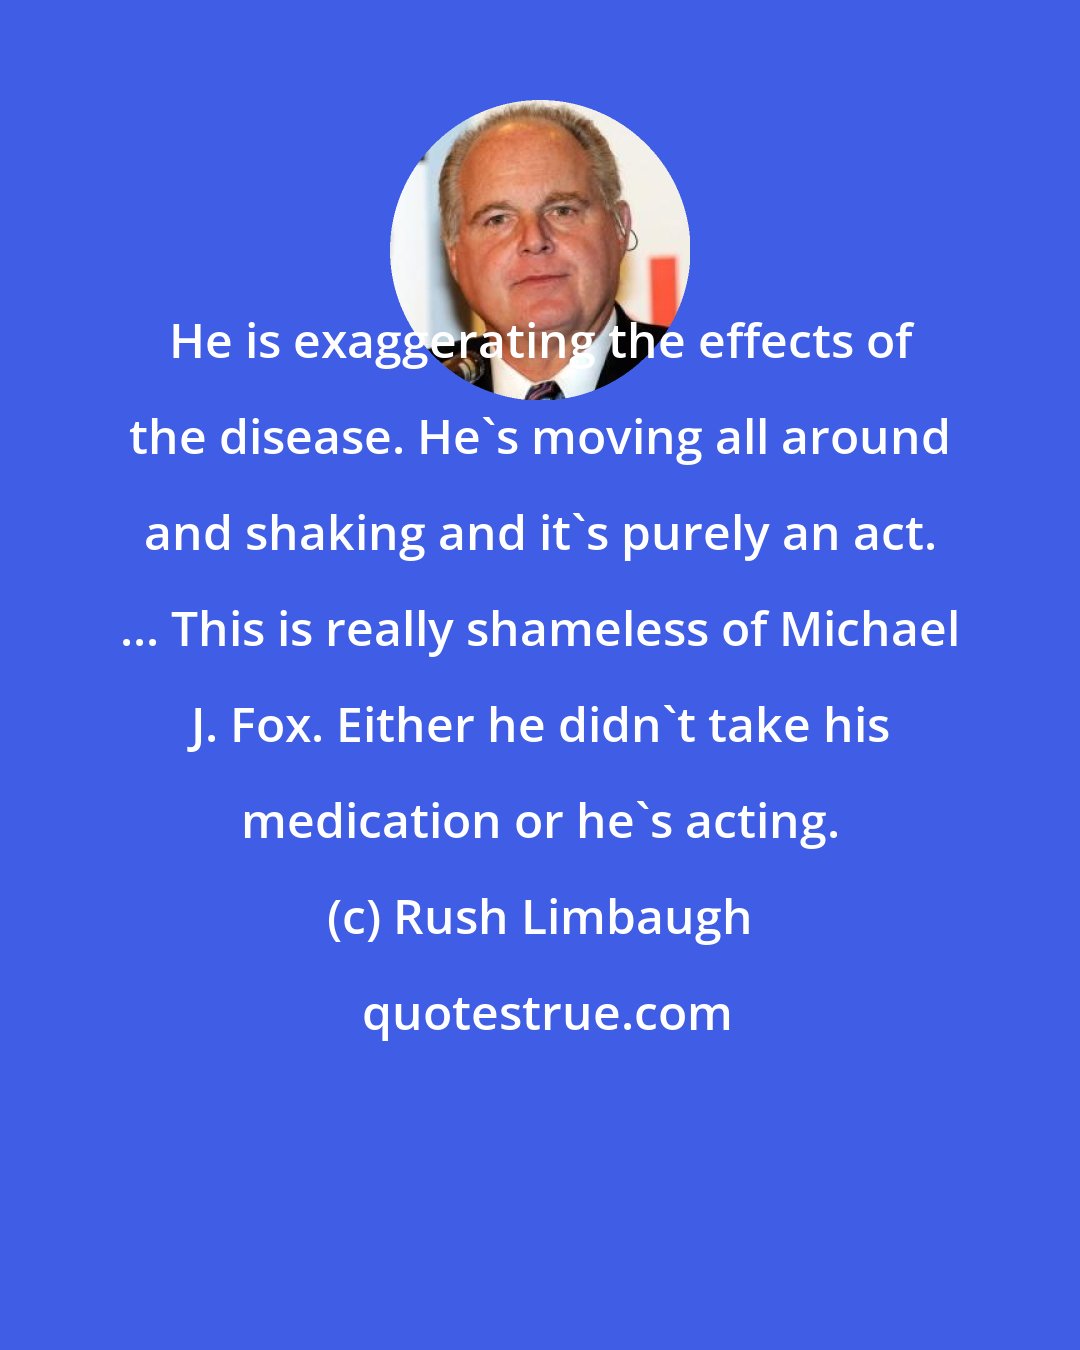 Rush Limbaugh: He is exaggerating the effects of the disease. He's moving all around and shaking and it's purely an act. ... This is really shameless of Michael J. Fox. Either he didn't take his medication or he's acting.